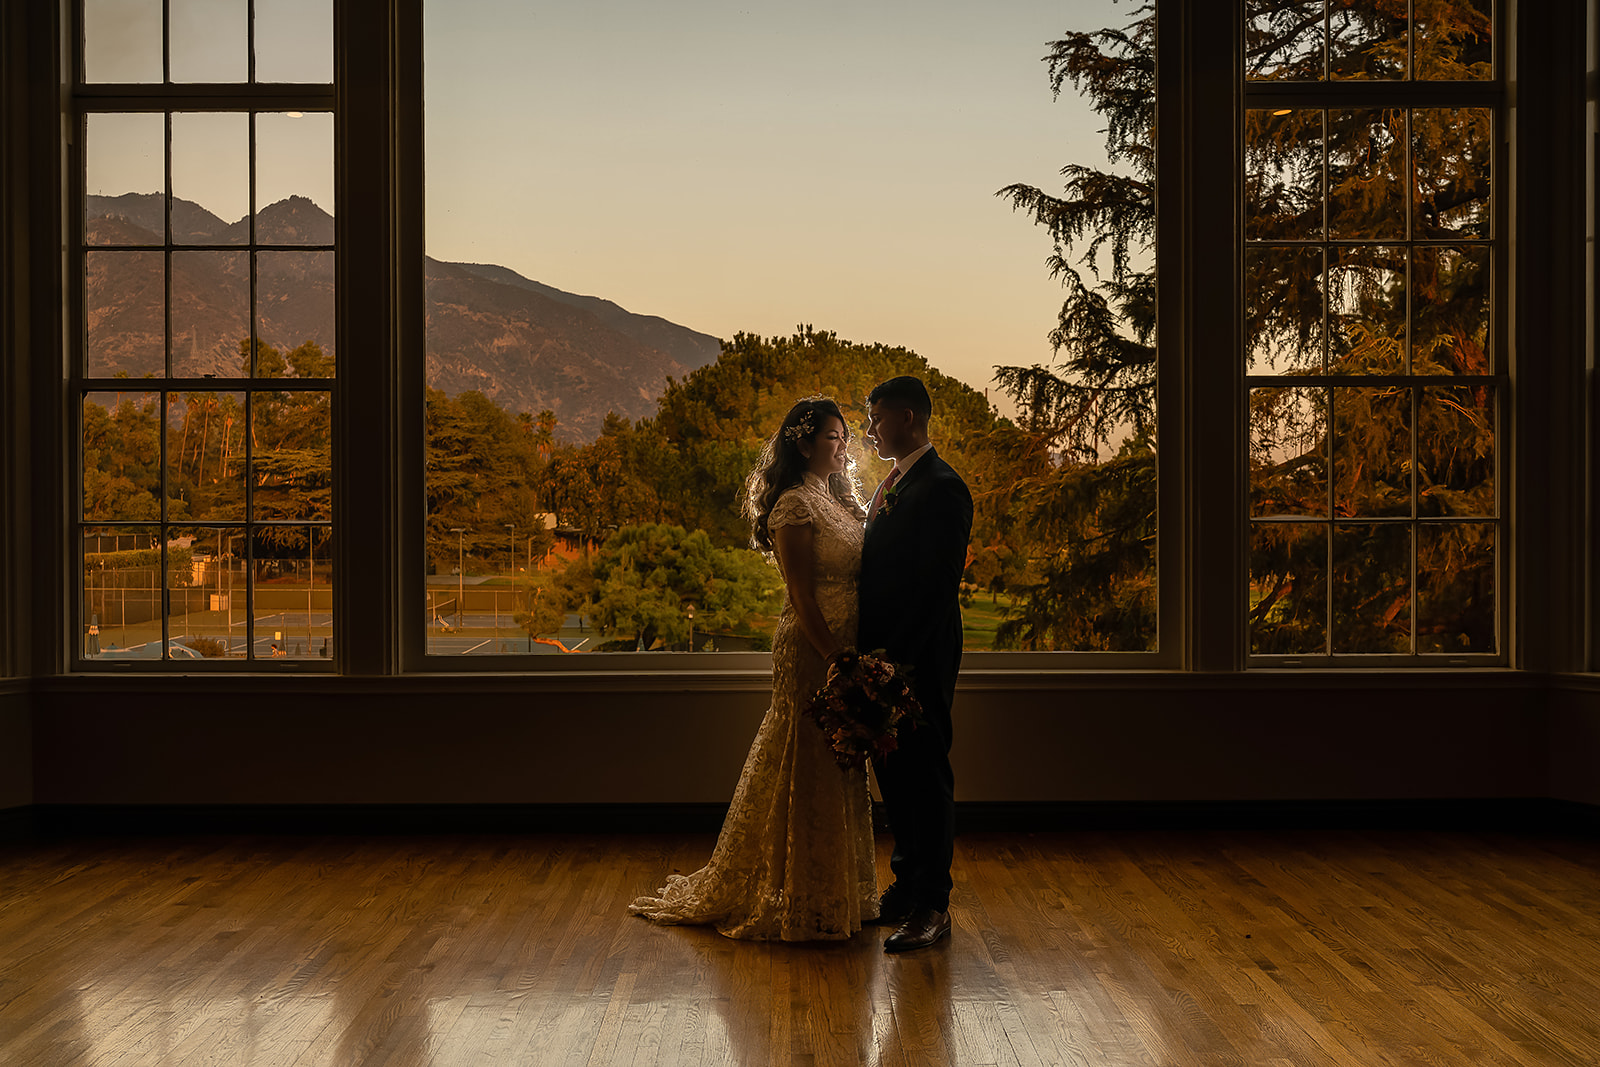 Wedding photographer captures bride and groom in front of a mountainside window.